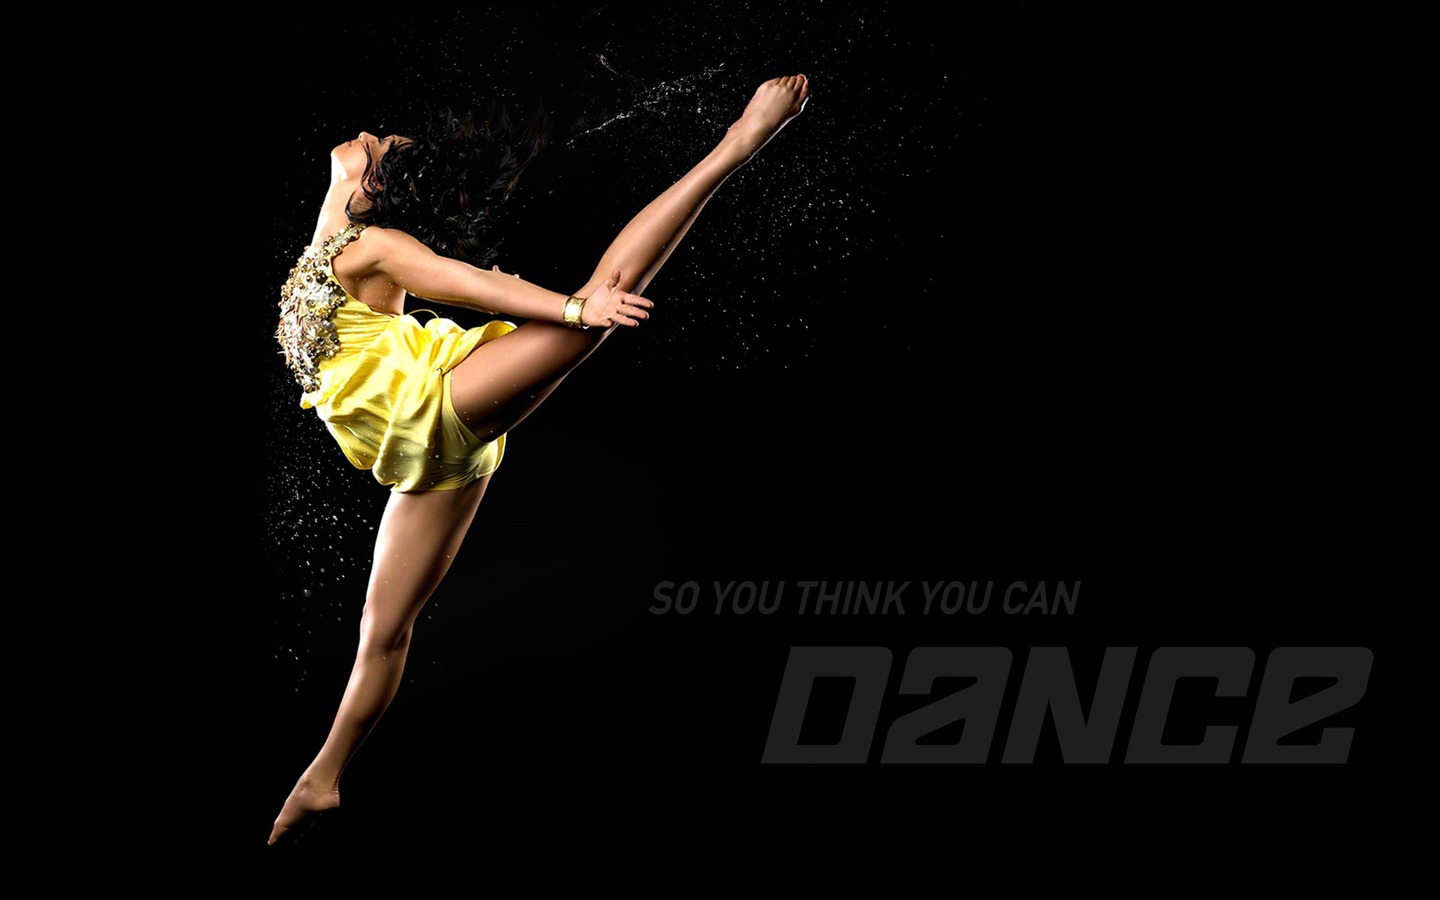 So You Think You Can Dance Wallpaper (1) #19 - 1440x900